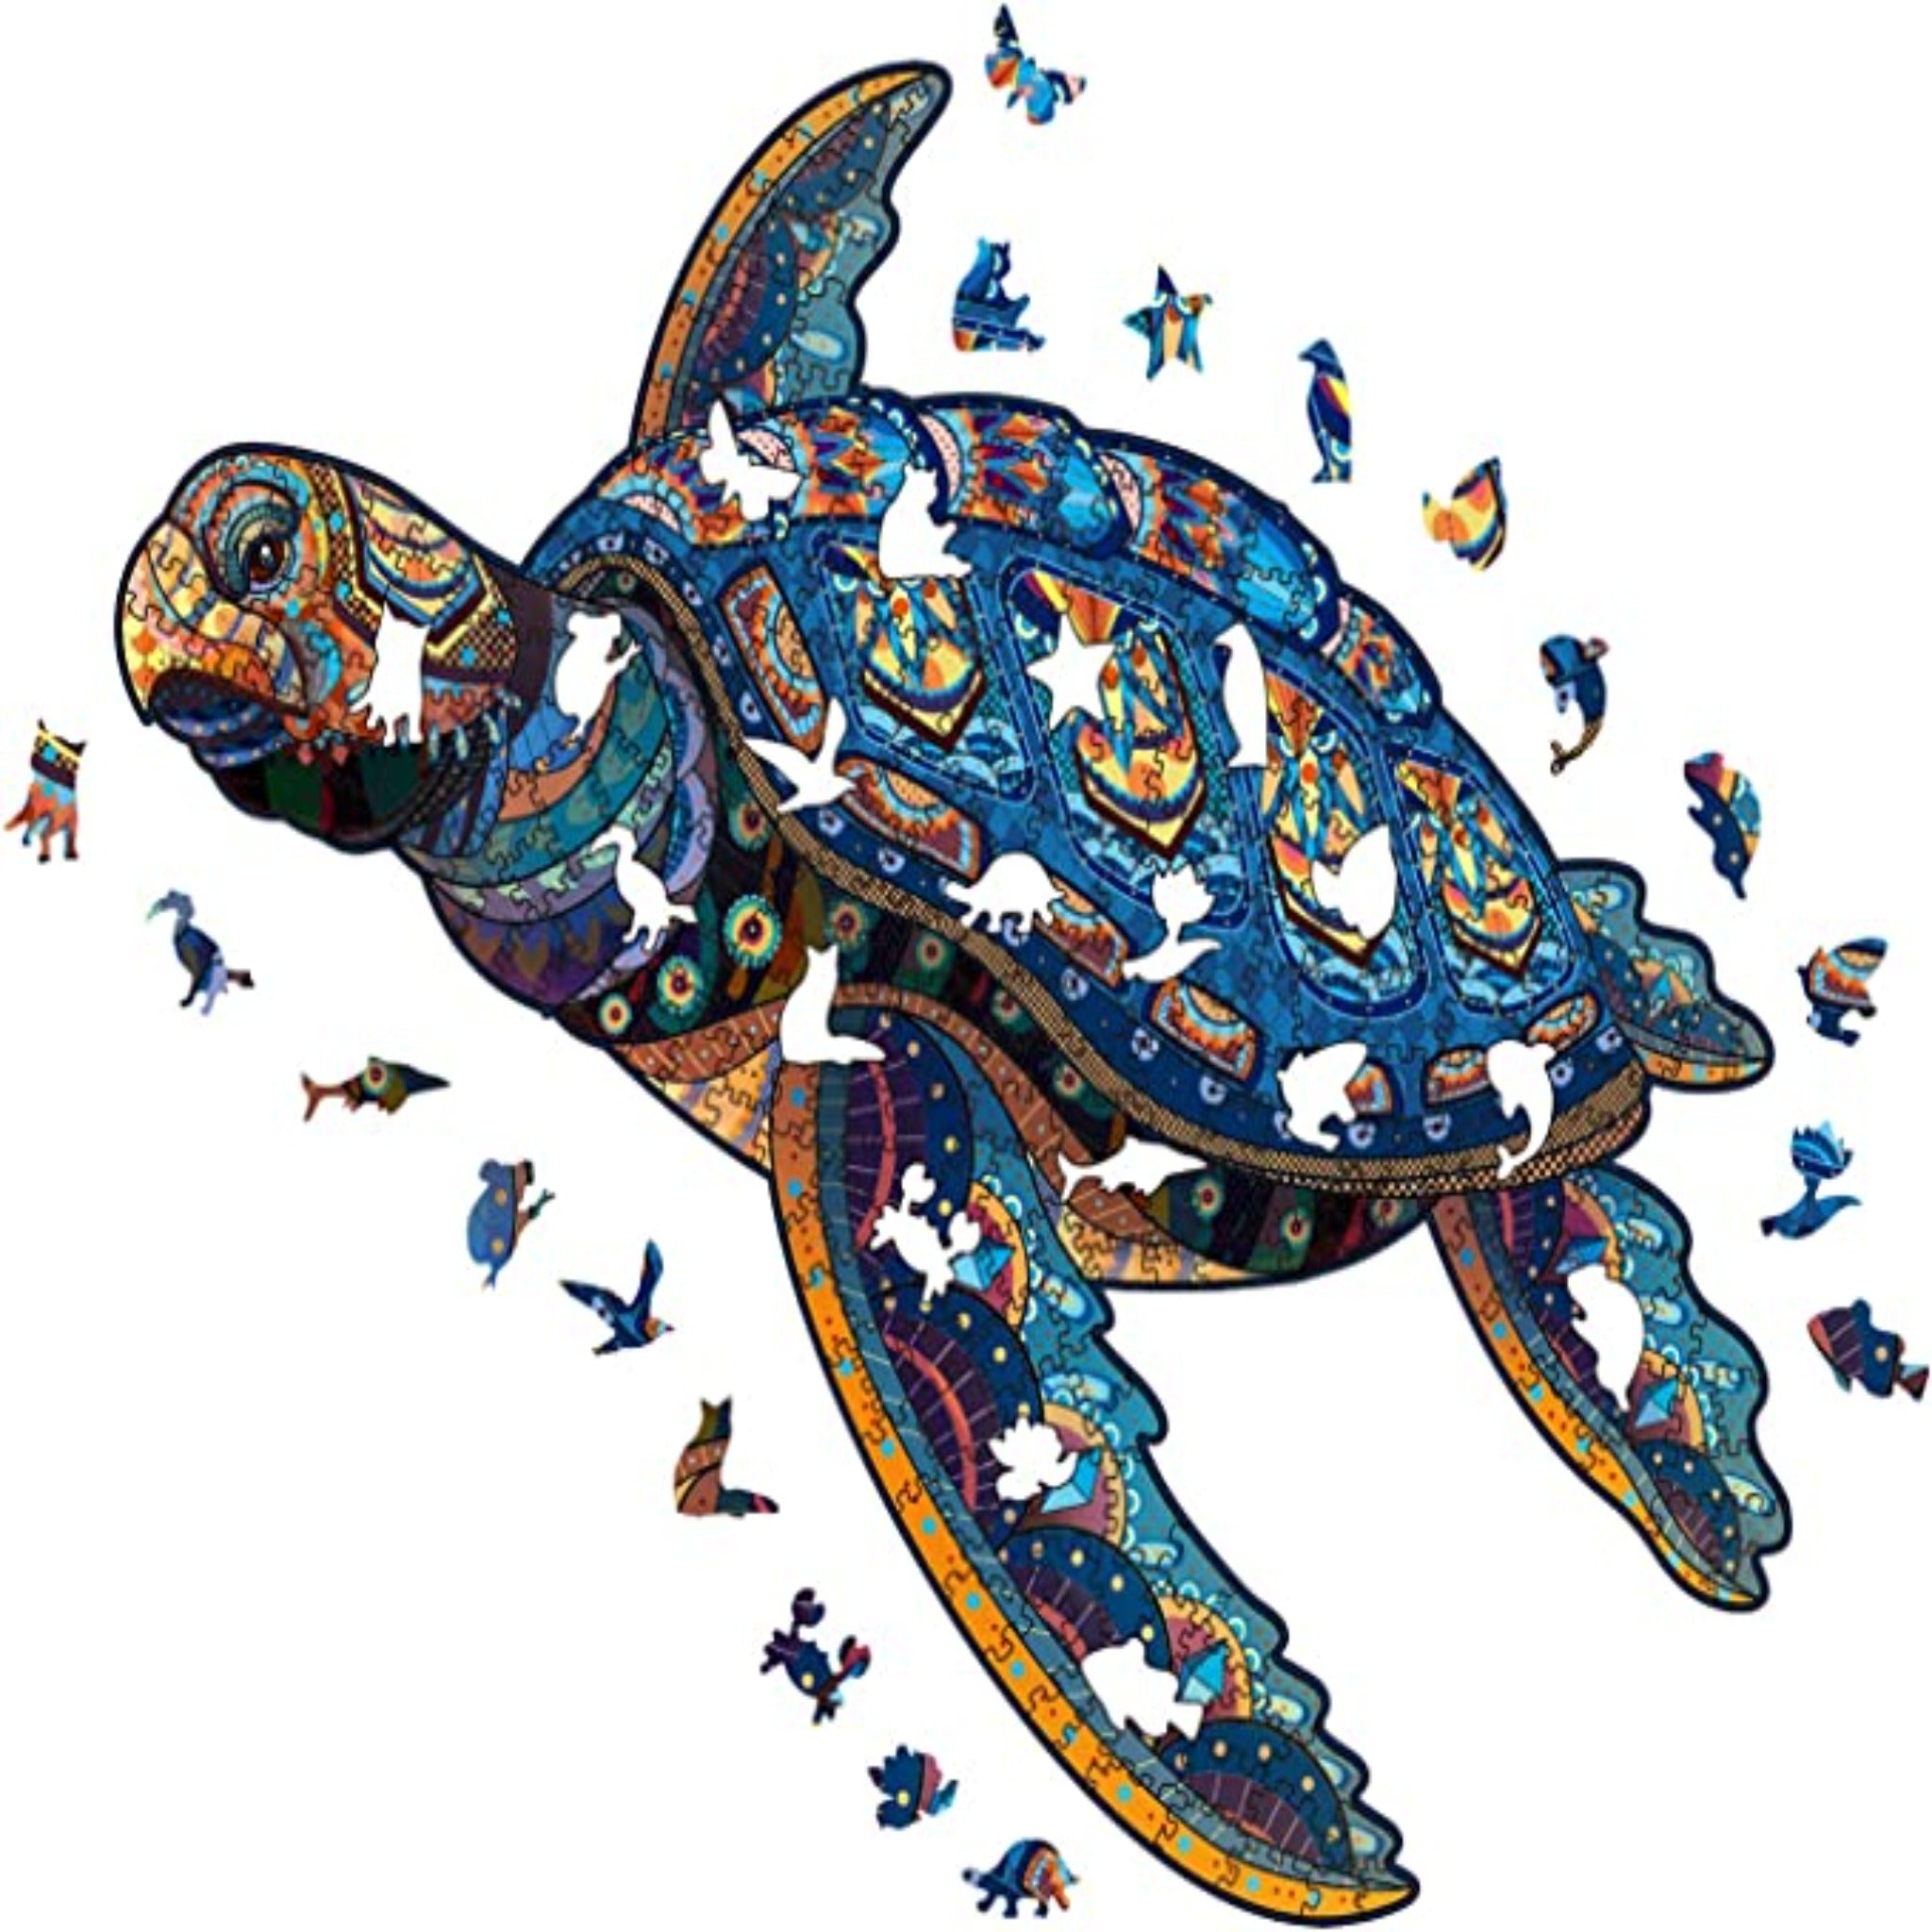 Wooden Sea Turtle Jigsaw Puzzle